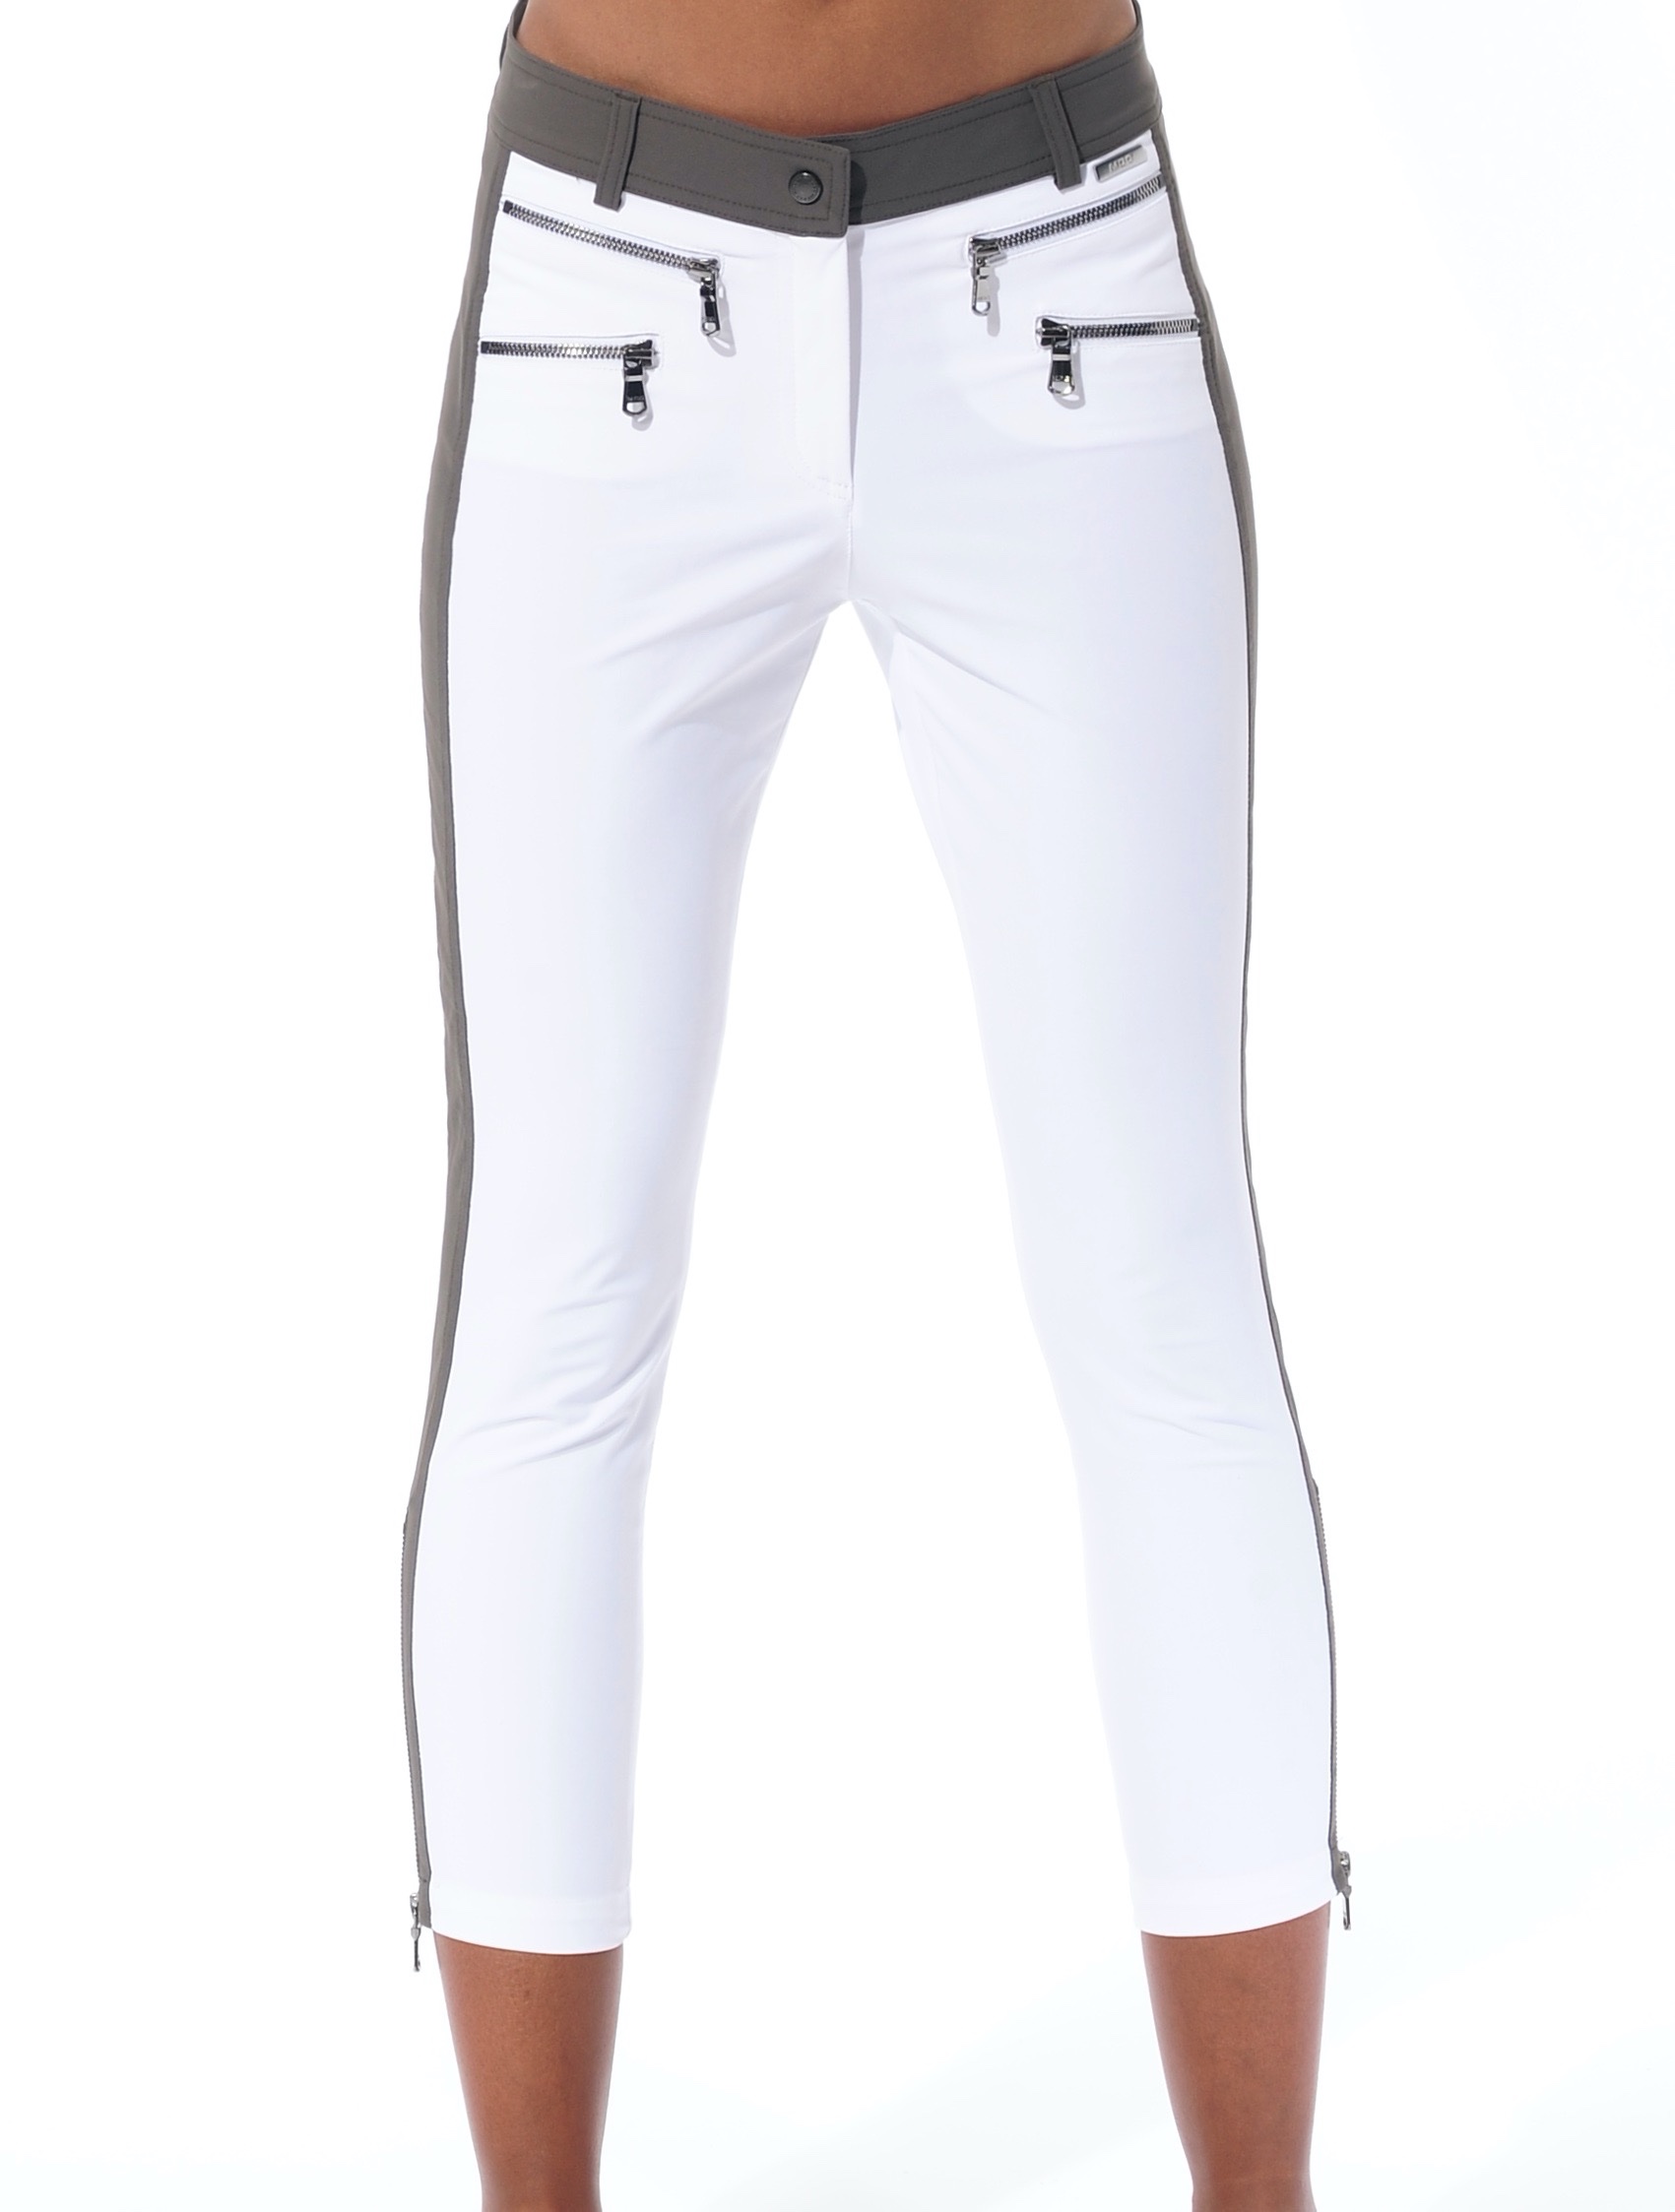 4way stretch double zip cropped pants white/stone 